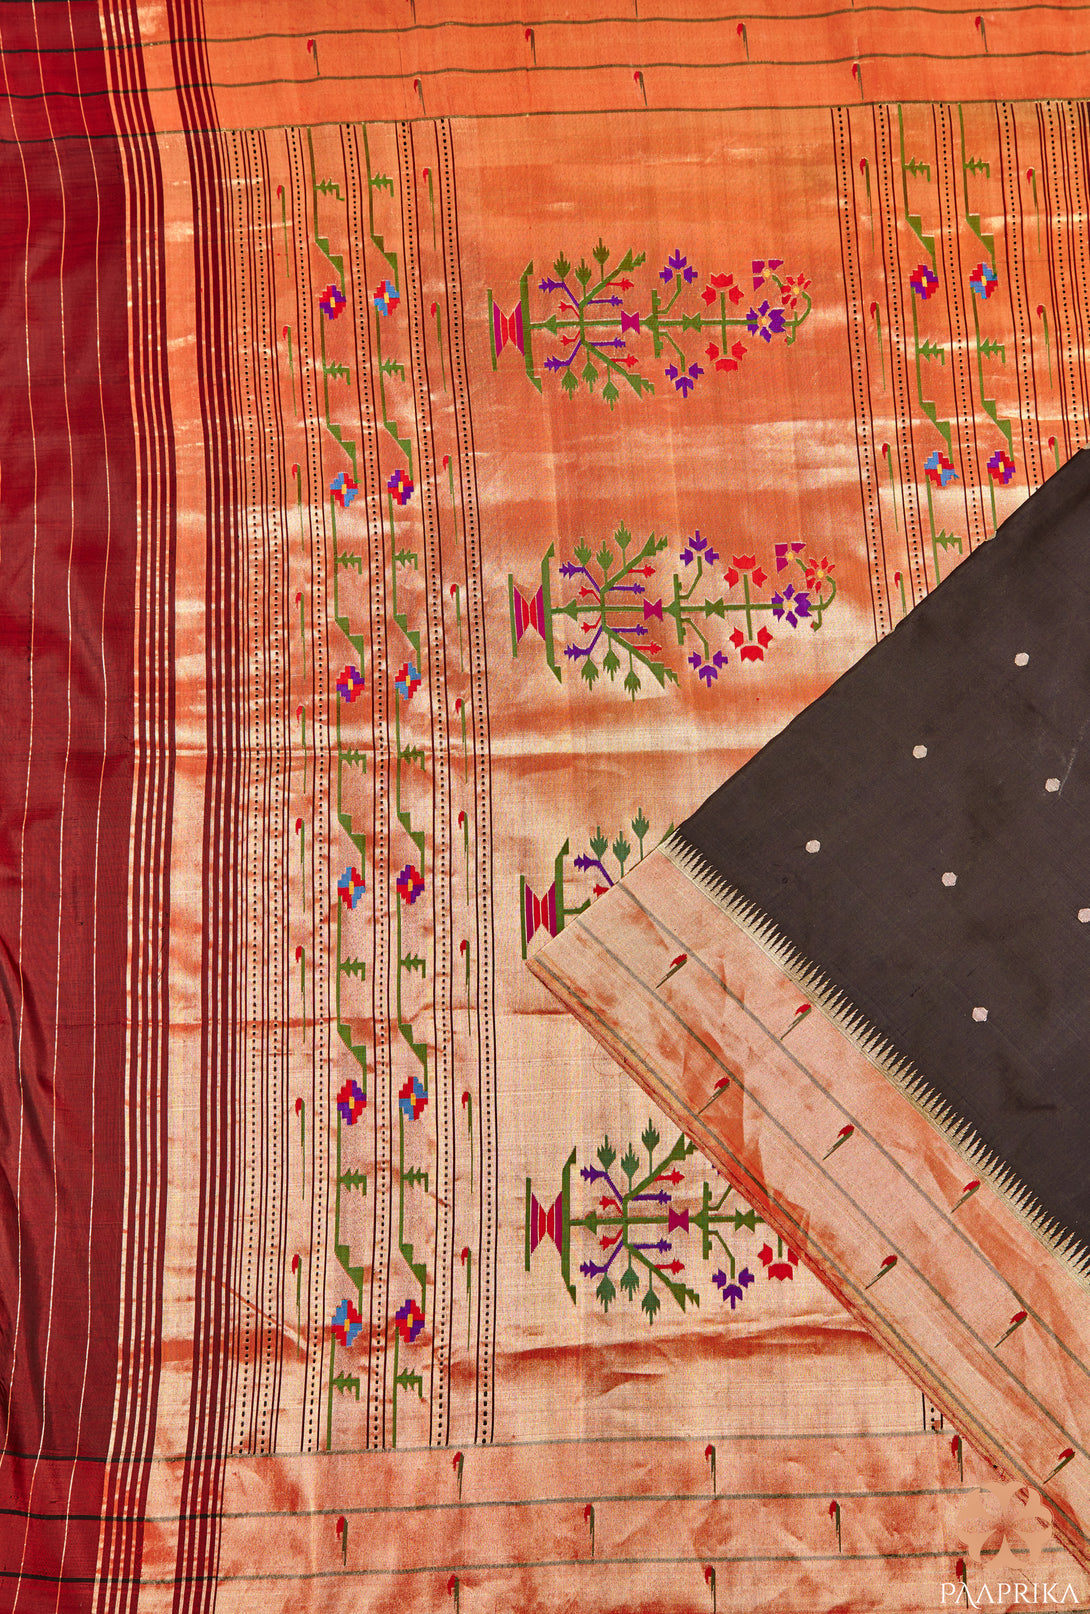 Close-up of the intricate Muniya motifs on the Stunning Black Triple Muniya Handwoven Paithani Silk Saree. The detailed handwoven designs in vibrant colors add a touch of elegance and cultural heritage to the black silk fabric, showcasing the artistic mastery of Paithani silk sarees.